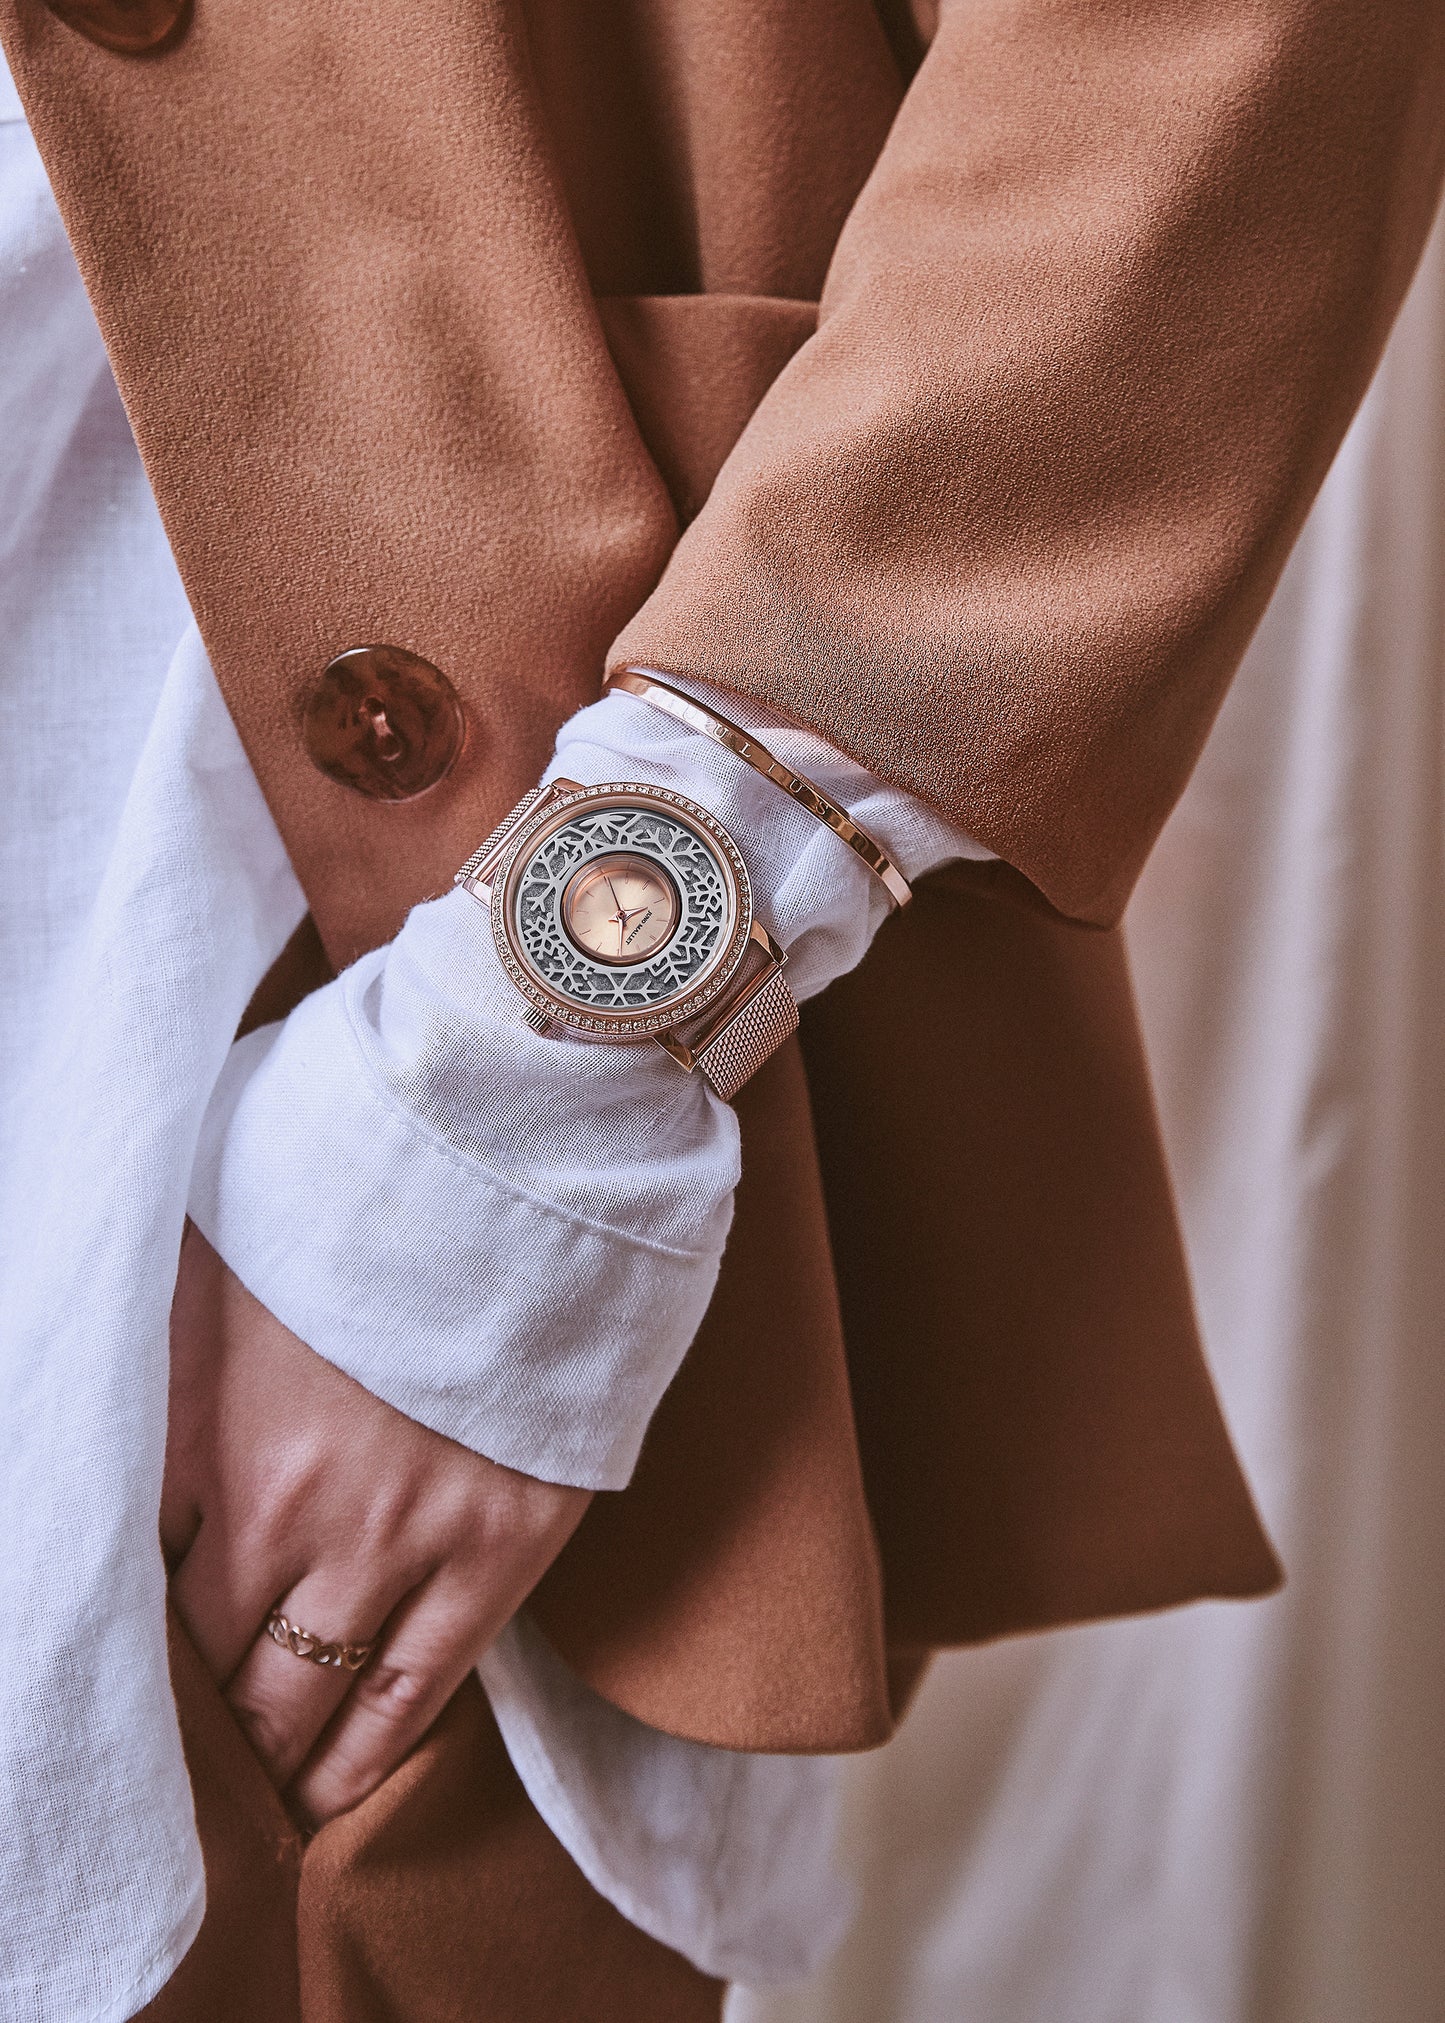 Crystal Lively Locket Watch | Rose Gold Minimalist Watch with Artistical Charm | Silver Ring of Snow